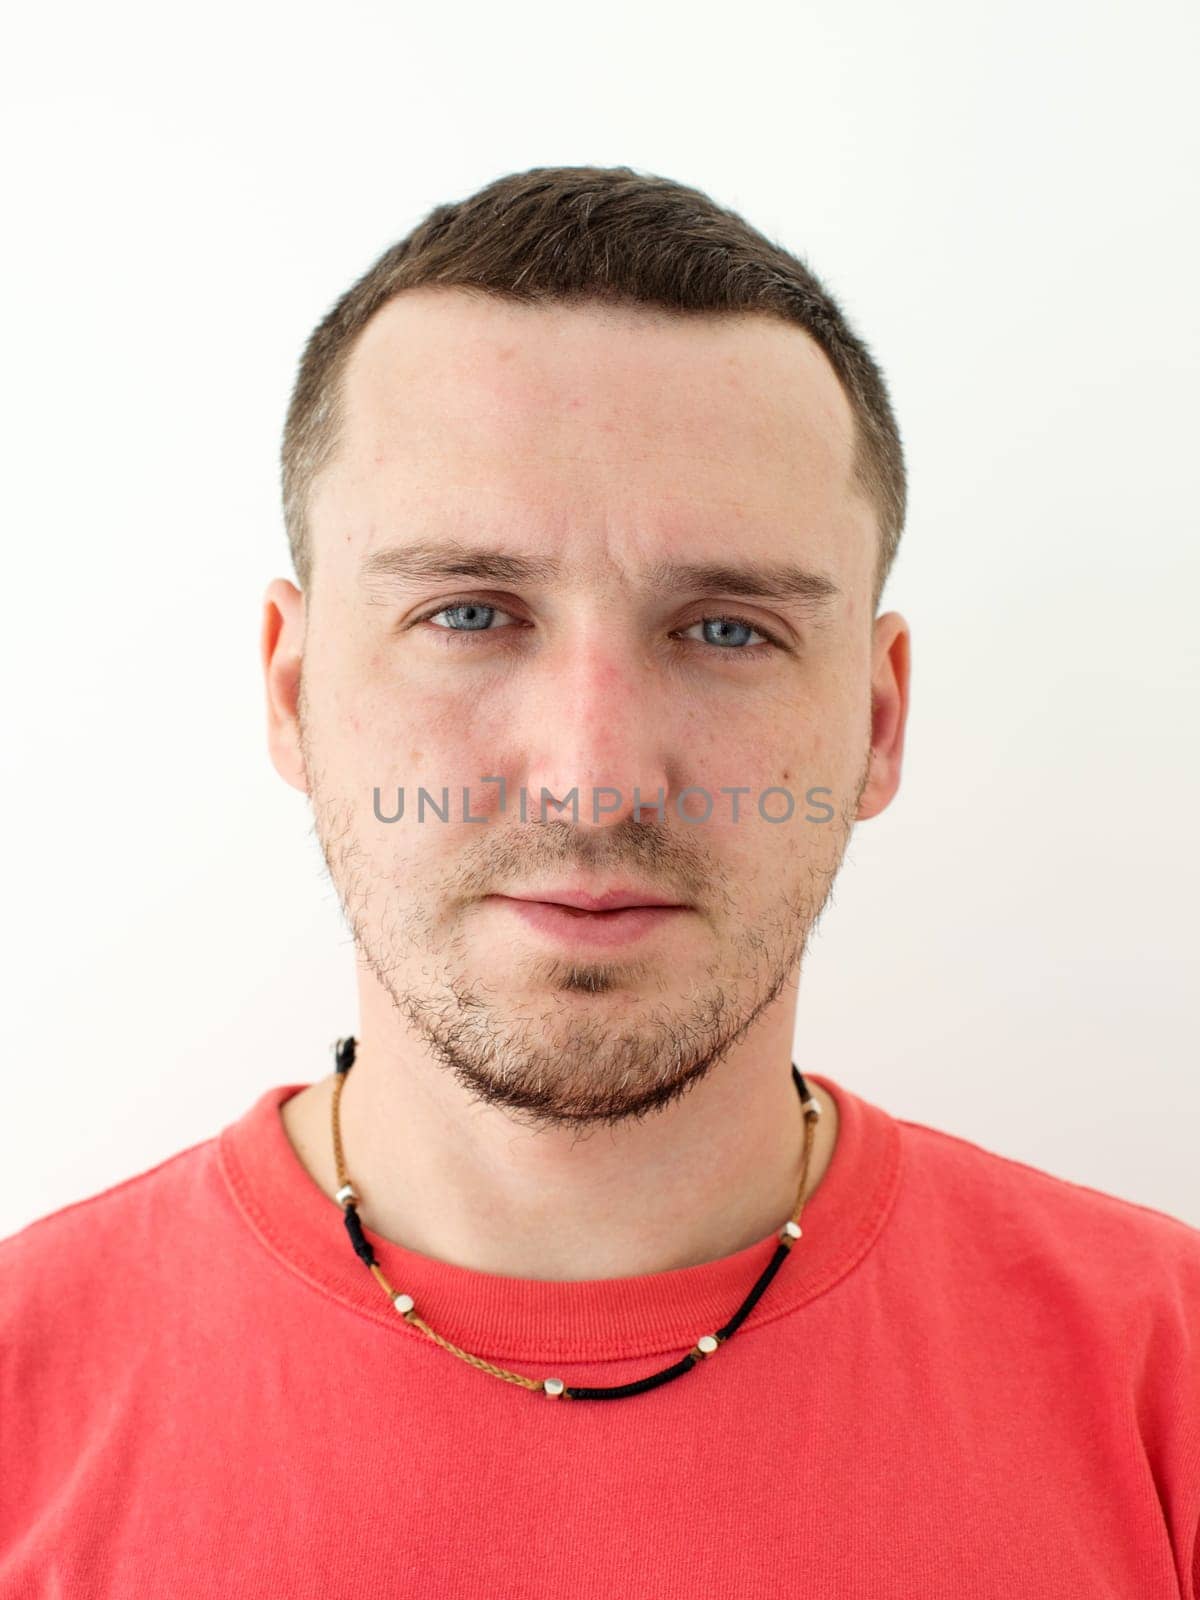 Man passport photo in red t-shirt with chain by Demkat